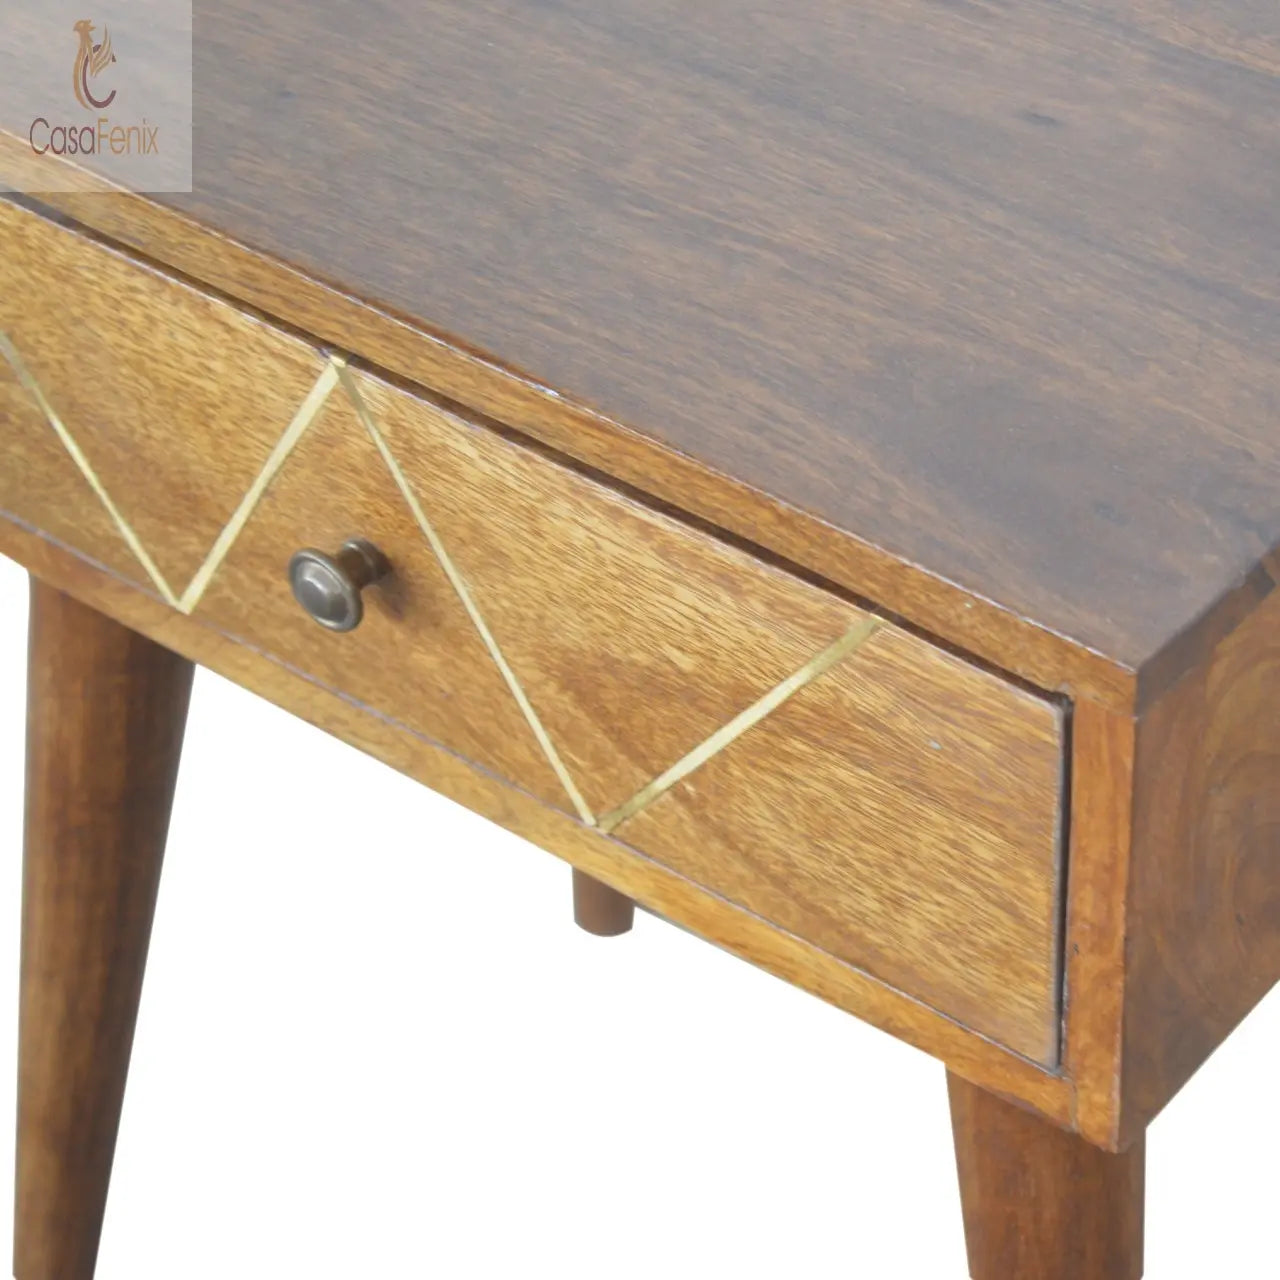 Geometric Brass Inlay Bedside Table 1 Drawer Chest Bedside table / chest CasaFenix